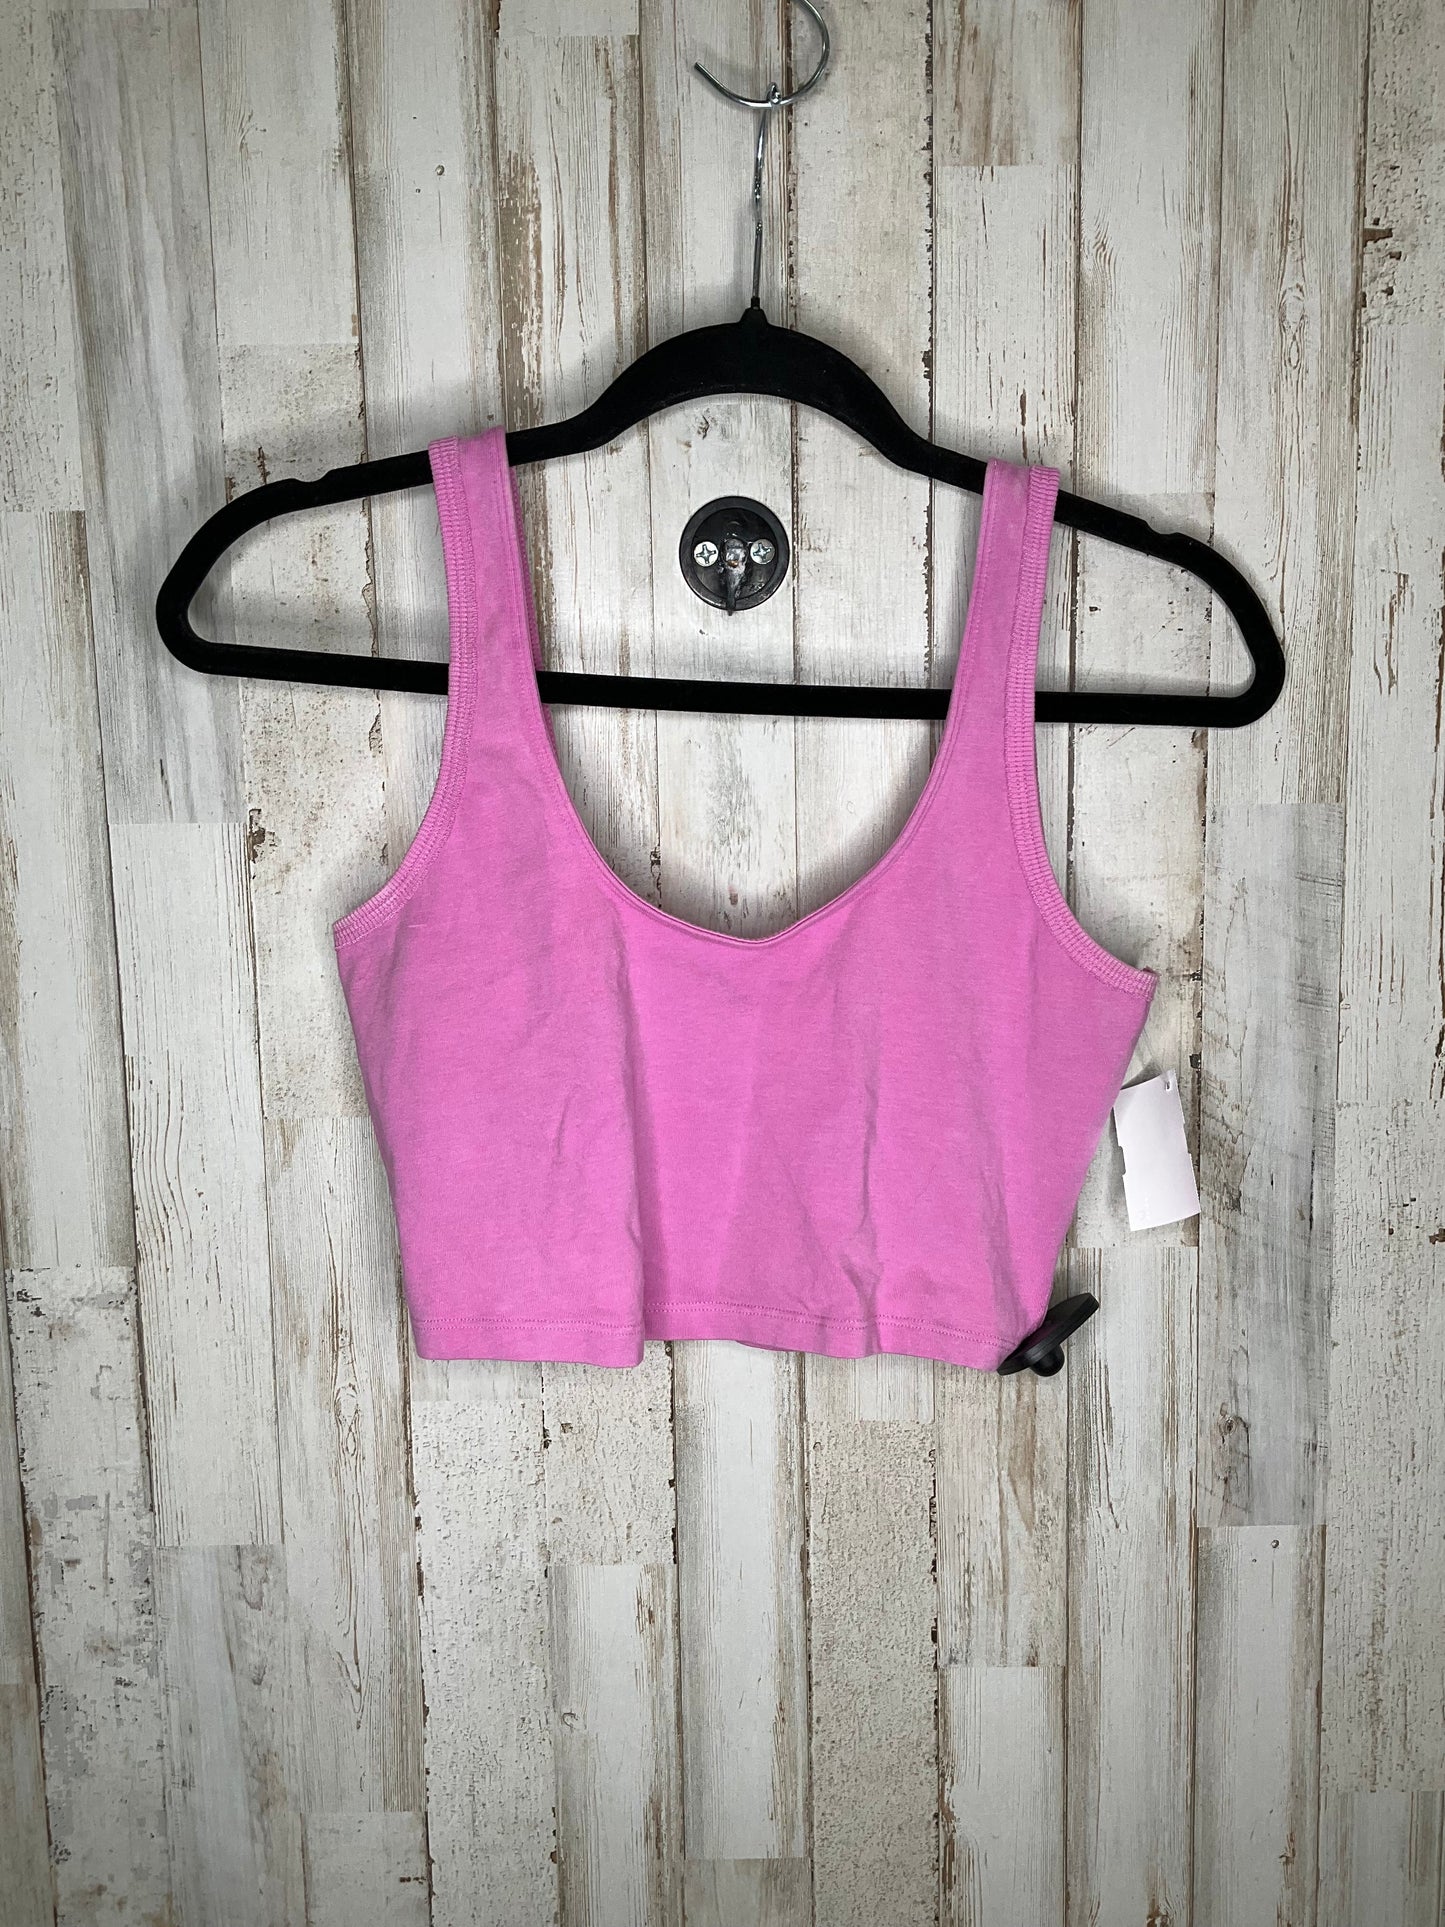 Pink Athletic Tank Top Free People, Size S